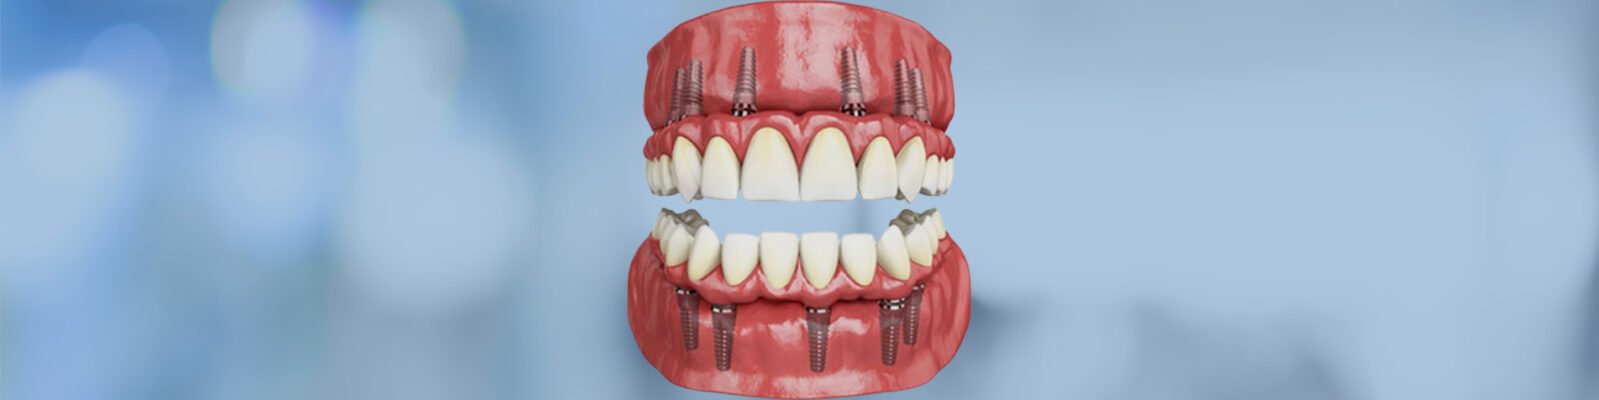 Full Mouth Rehabilitation With Straight Six Implants